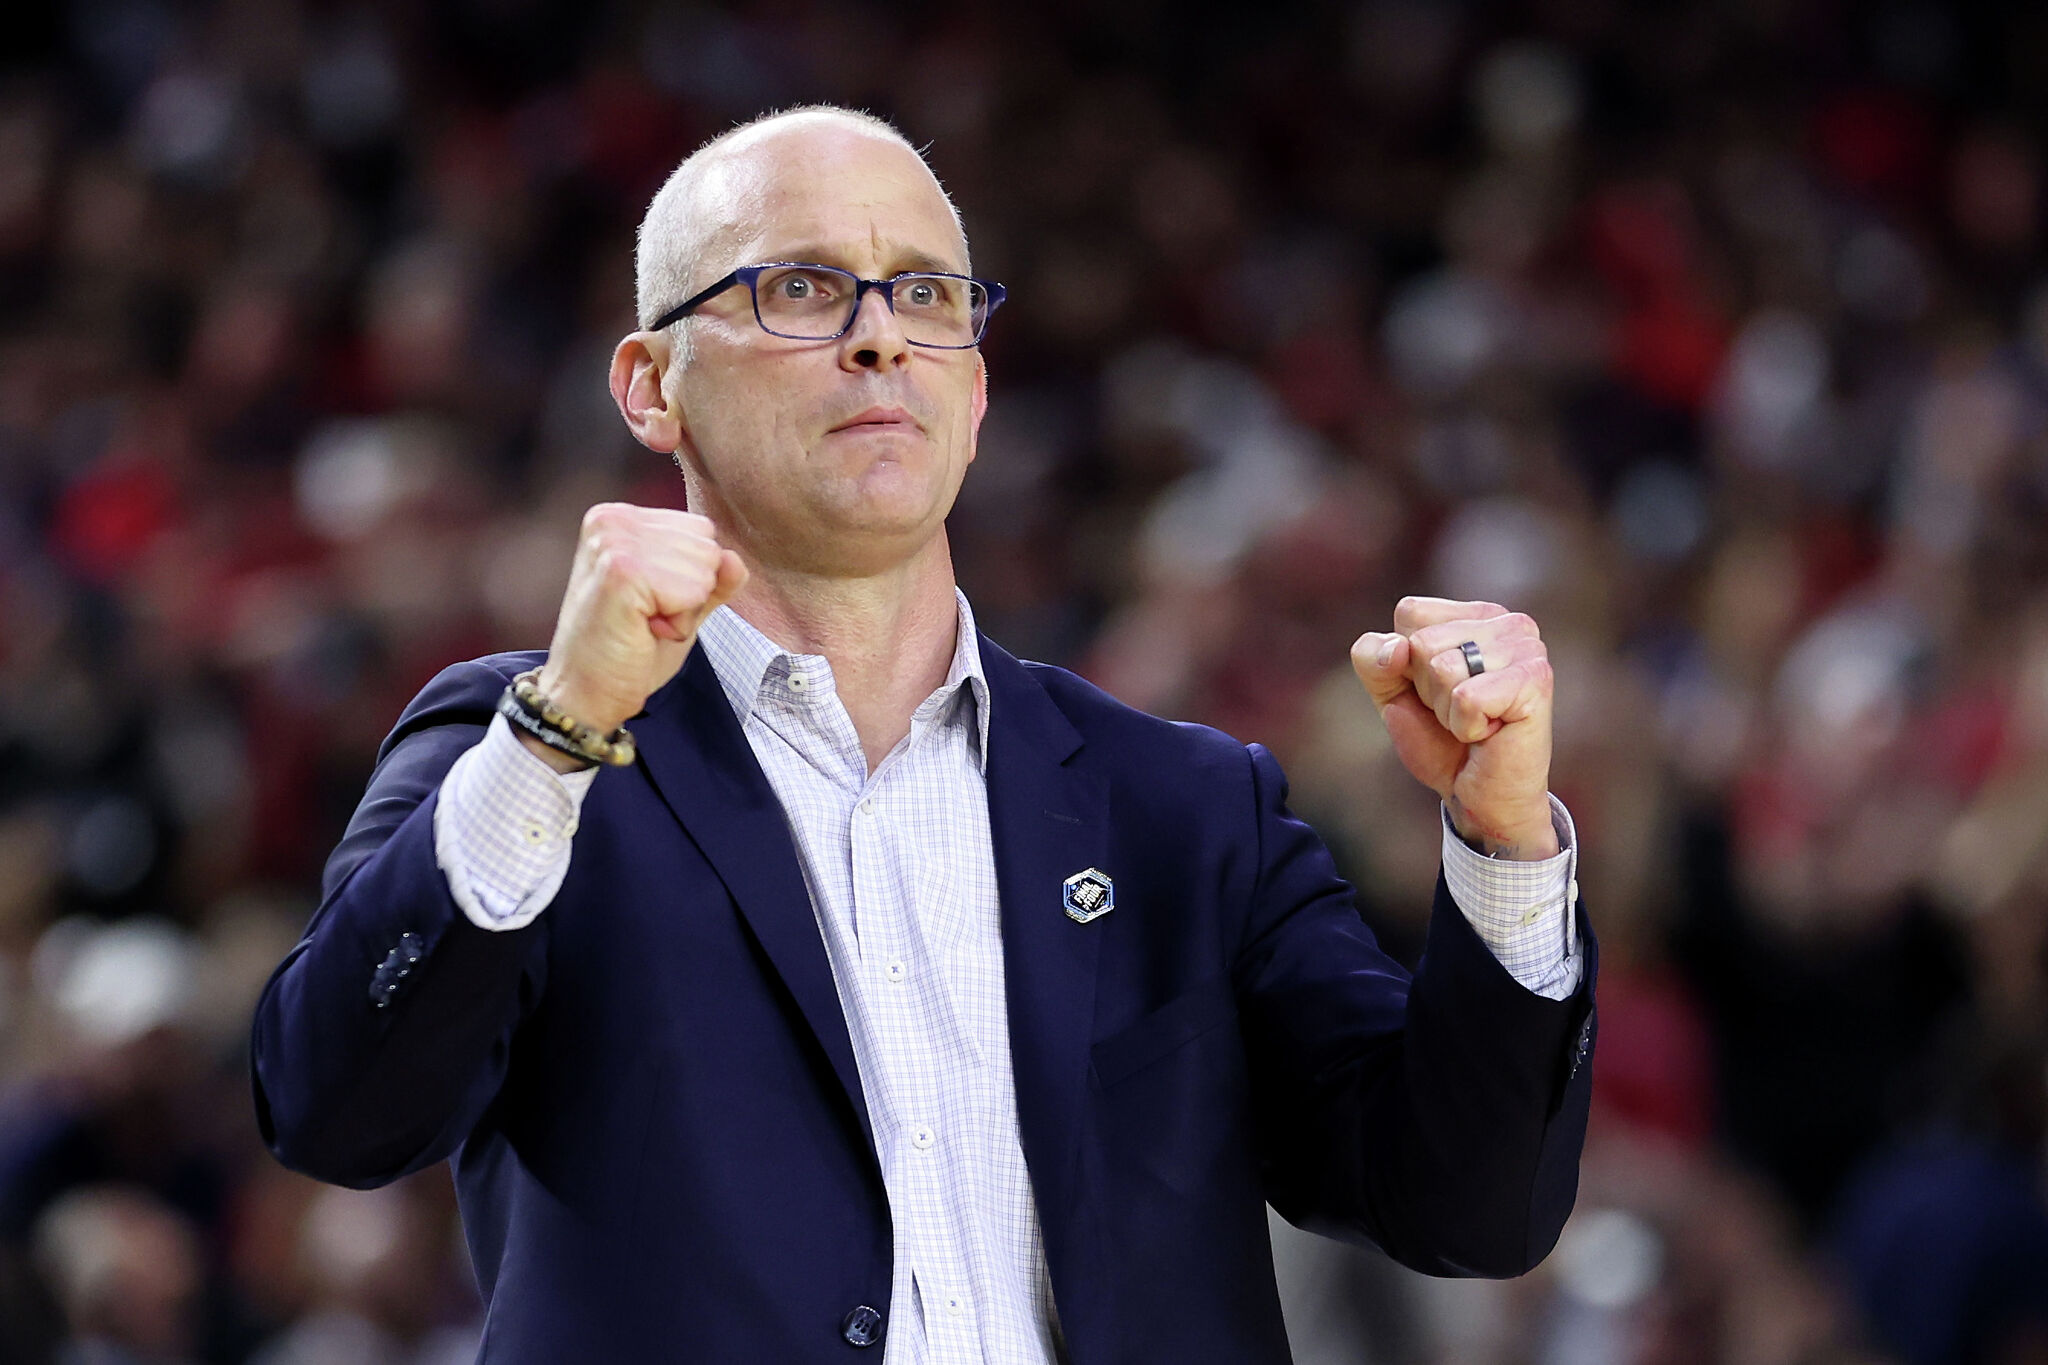 Dan Hurley's Lucky Underwear Leads To $50k Donation To Charity